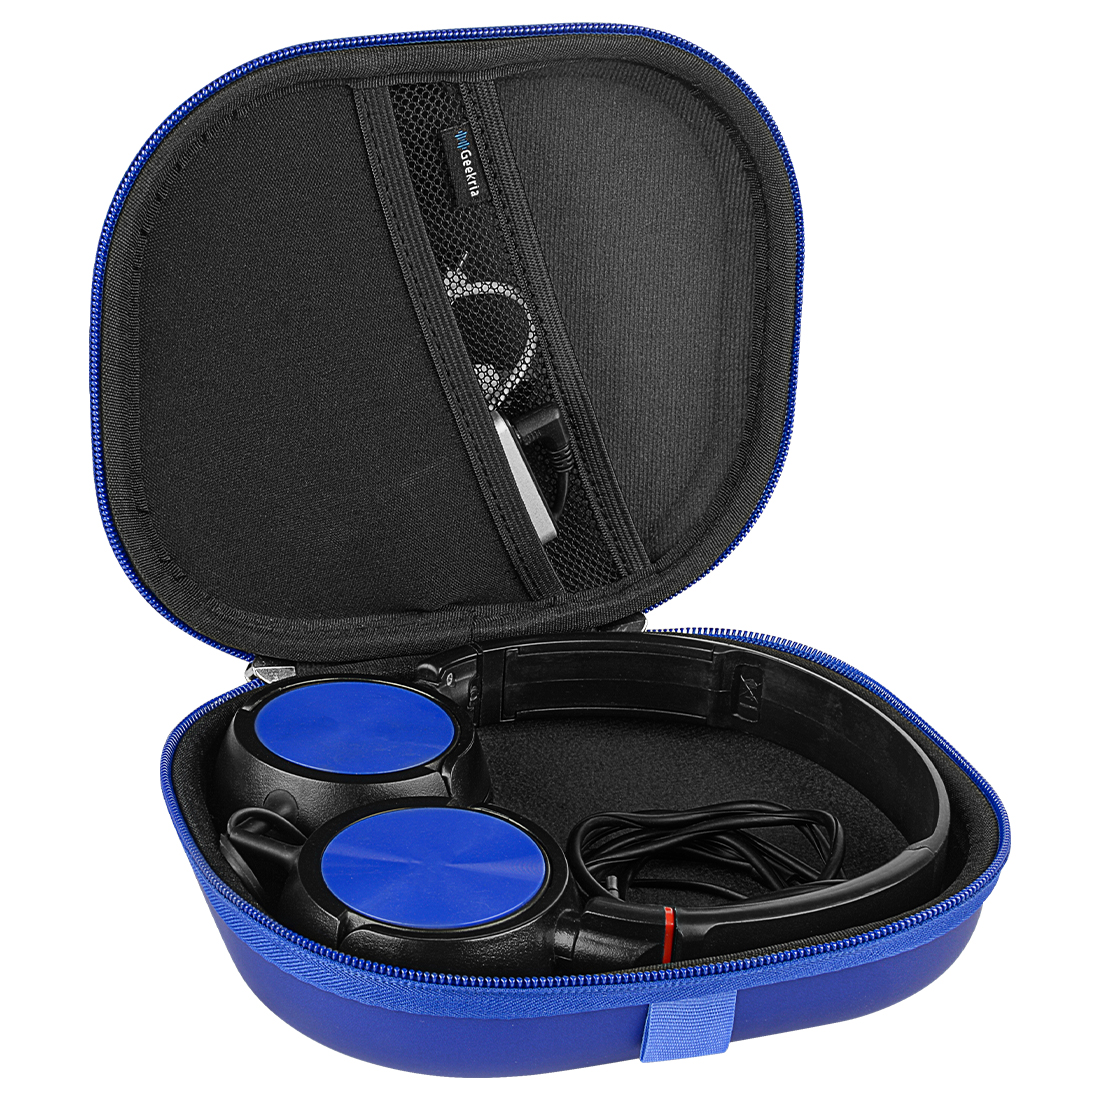 Geekria Hard Case for Sony Headphones (Blue)